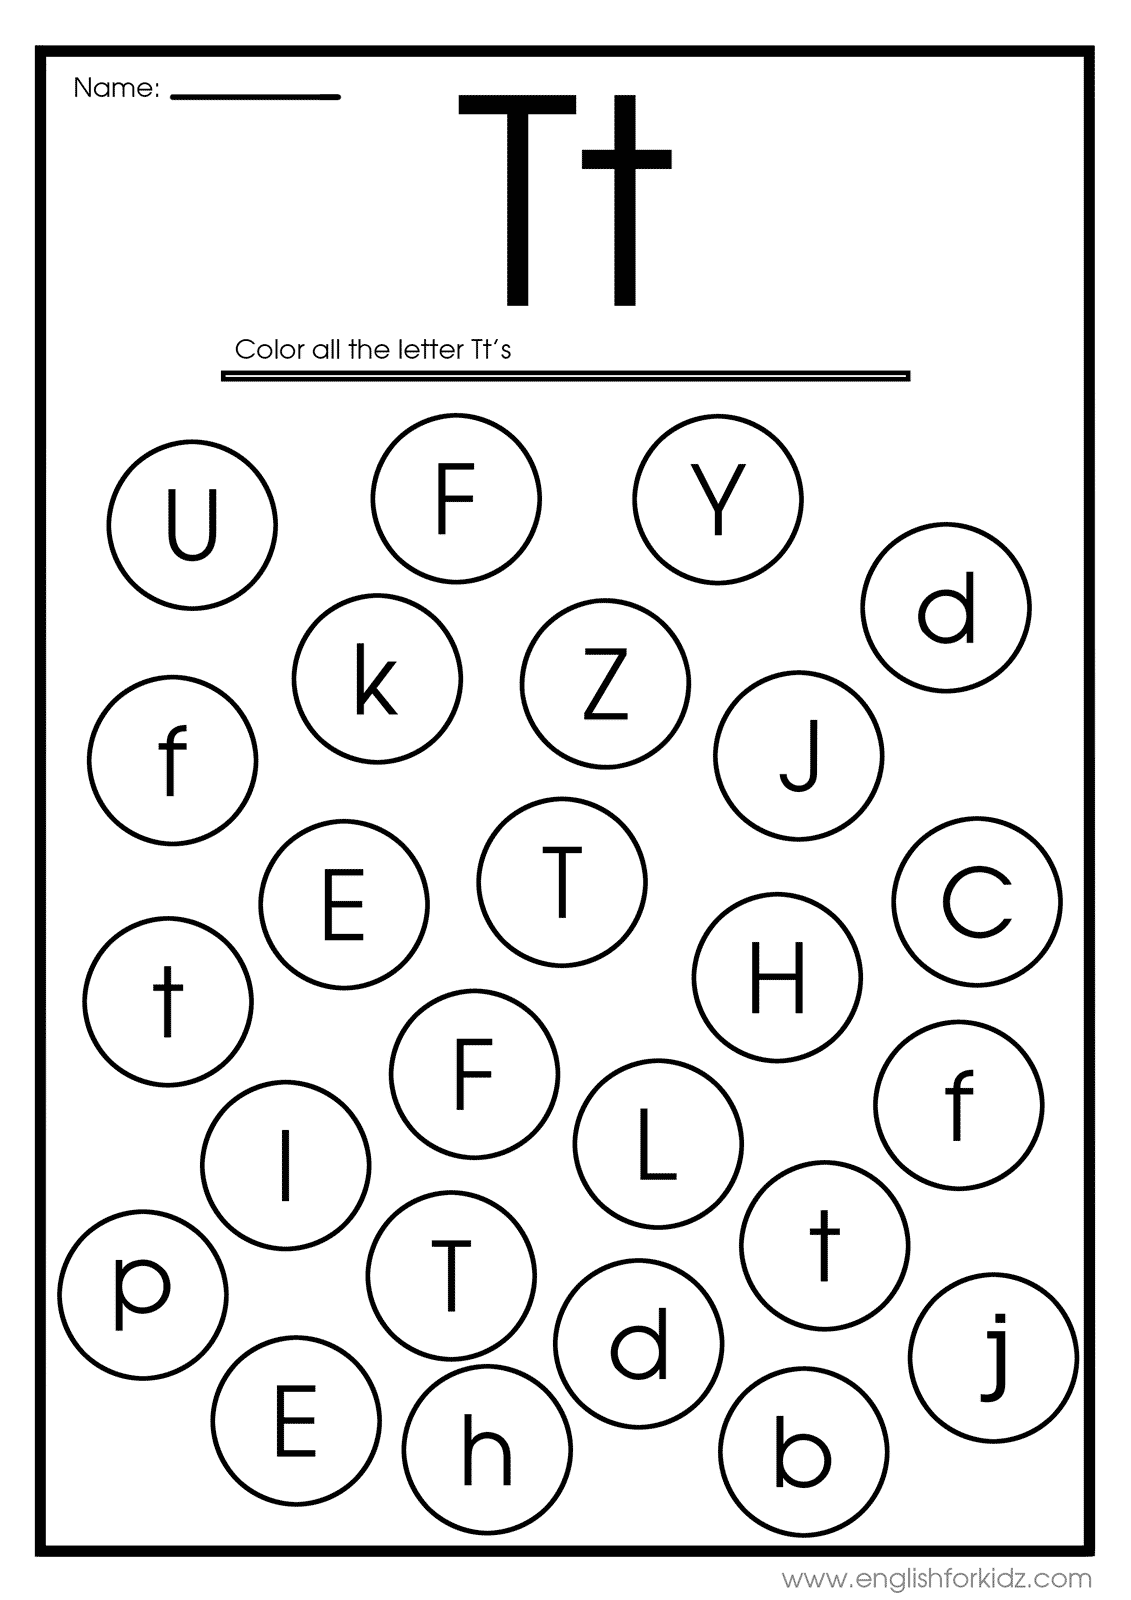 English for kids step by step letter t worksheets flash cards coloring pages